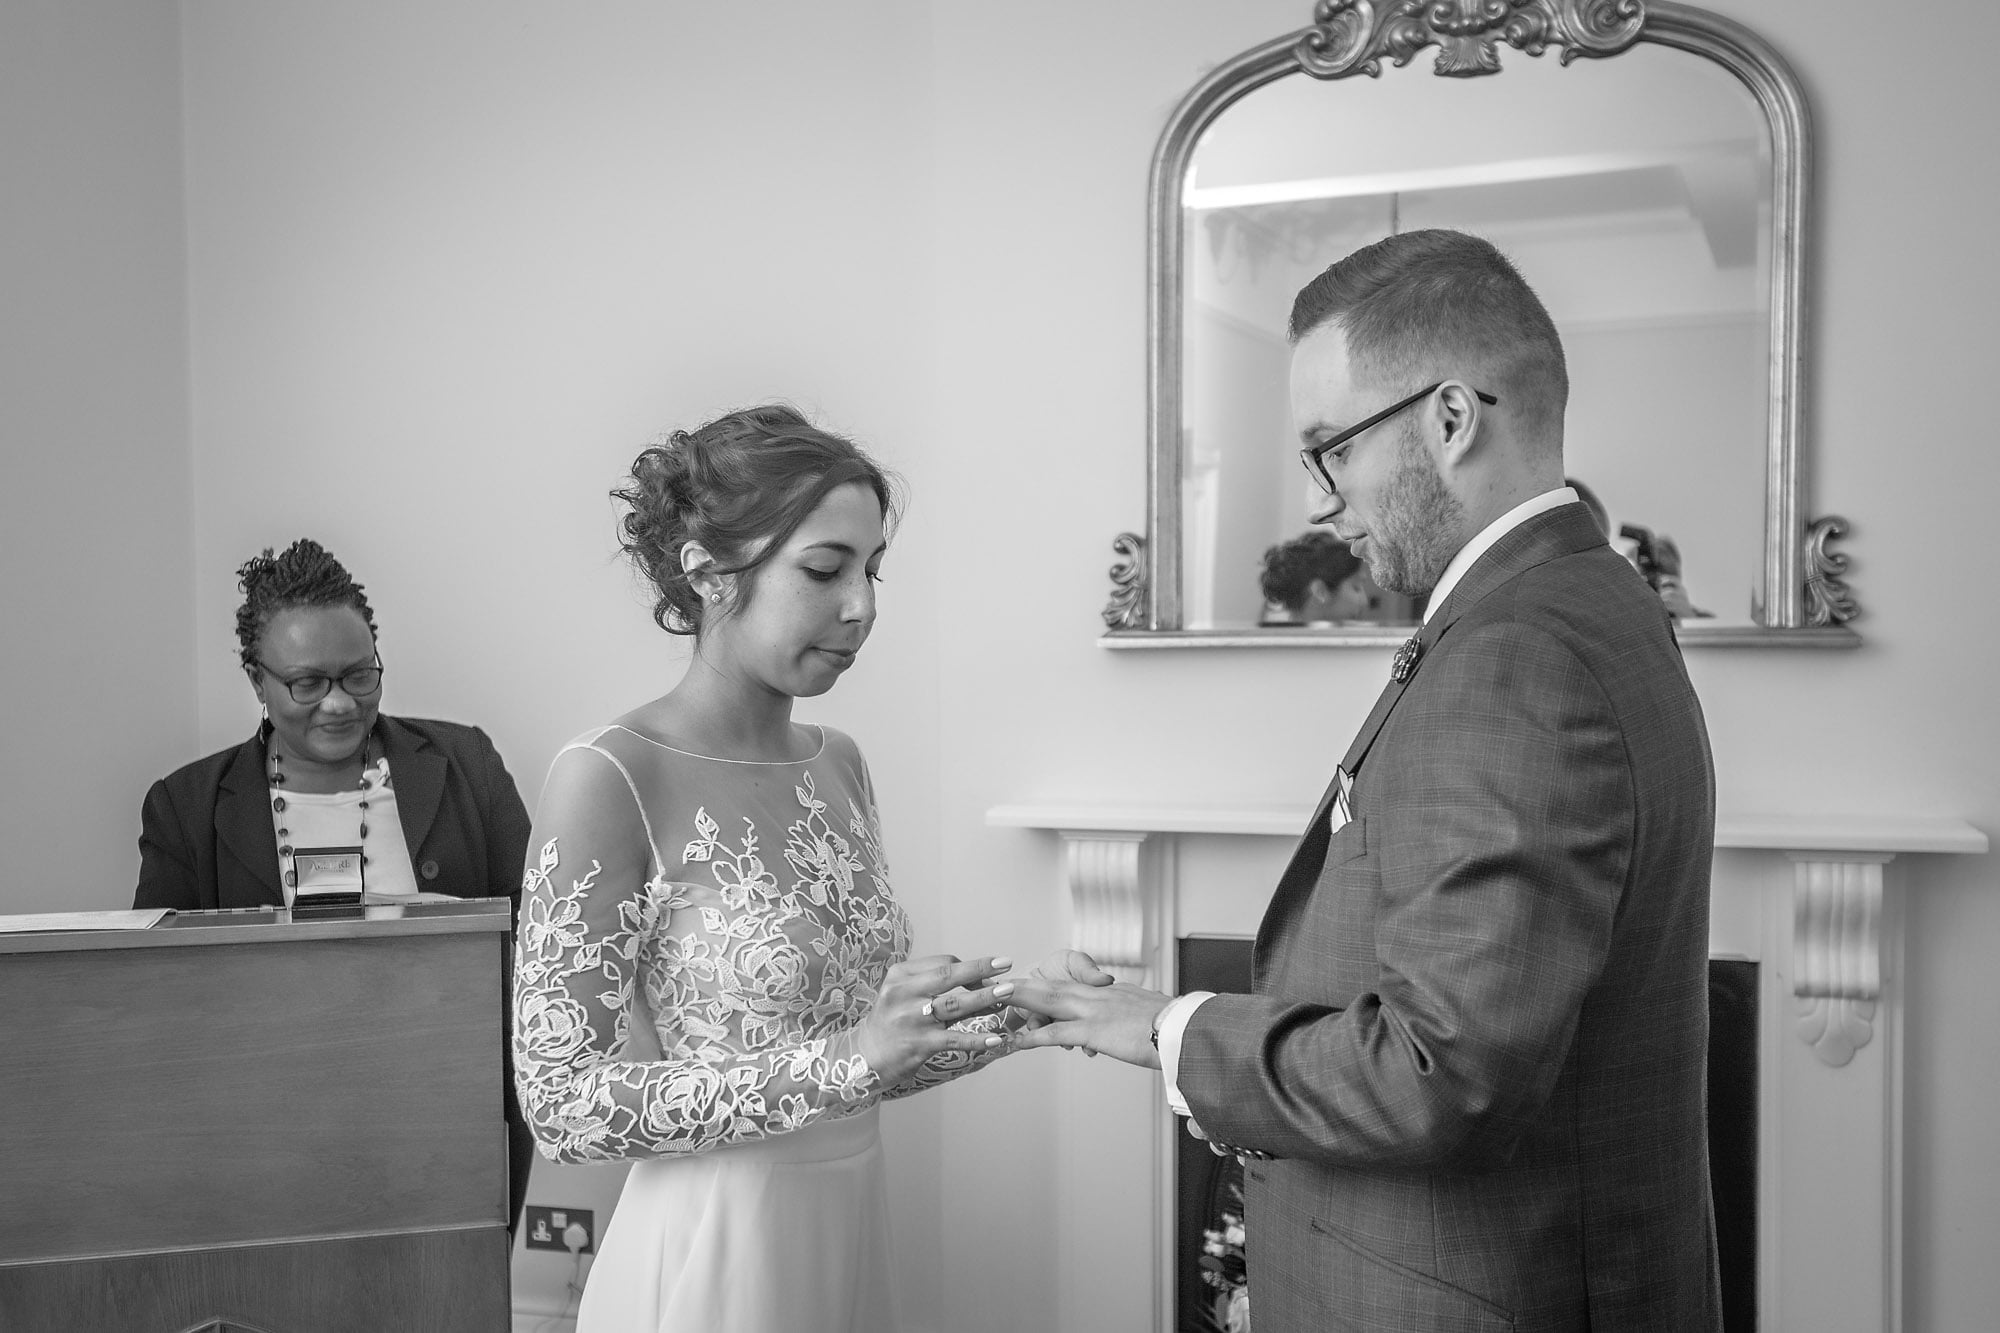 The bride places the ring on the finger of the groom at a register office wedding in Greenwich